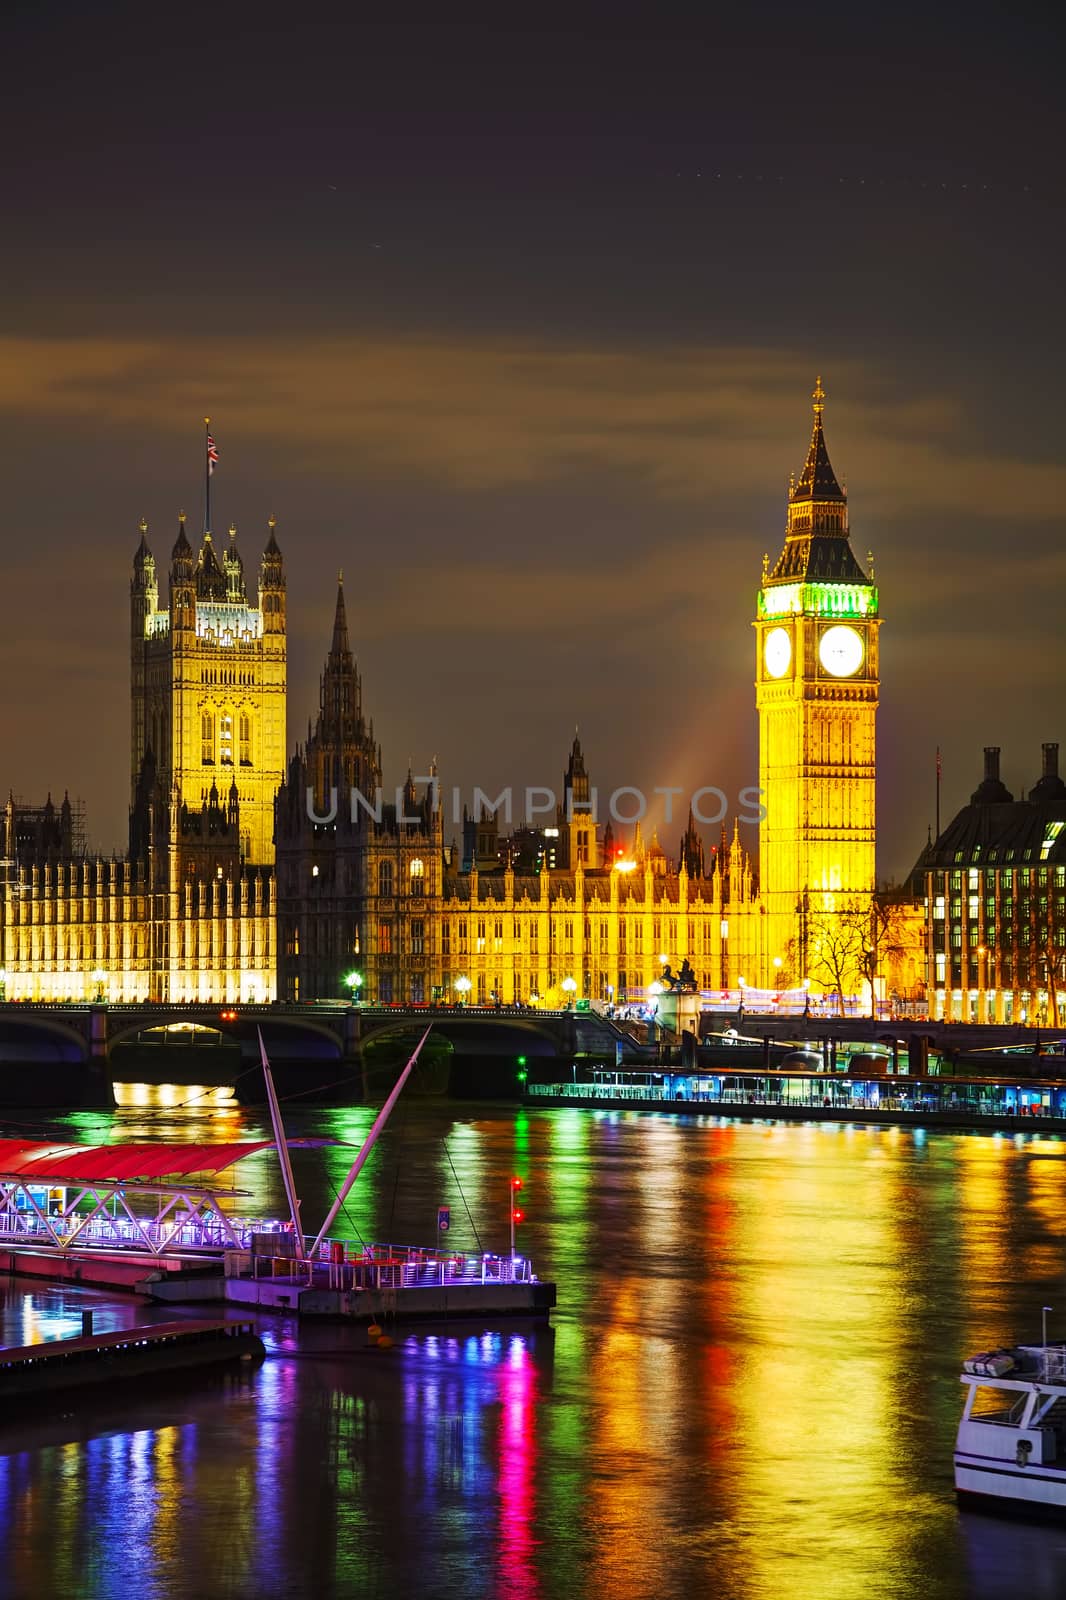 Overview of London with the Elizabeth Tower and Houses of Parliament